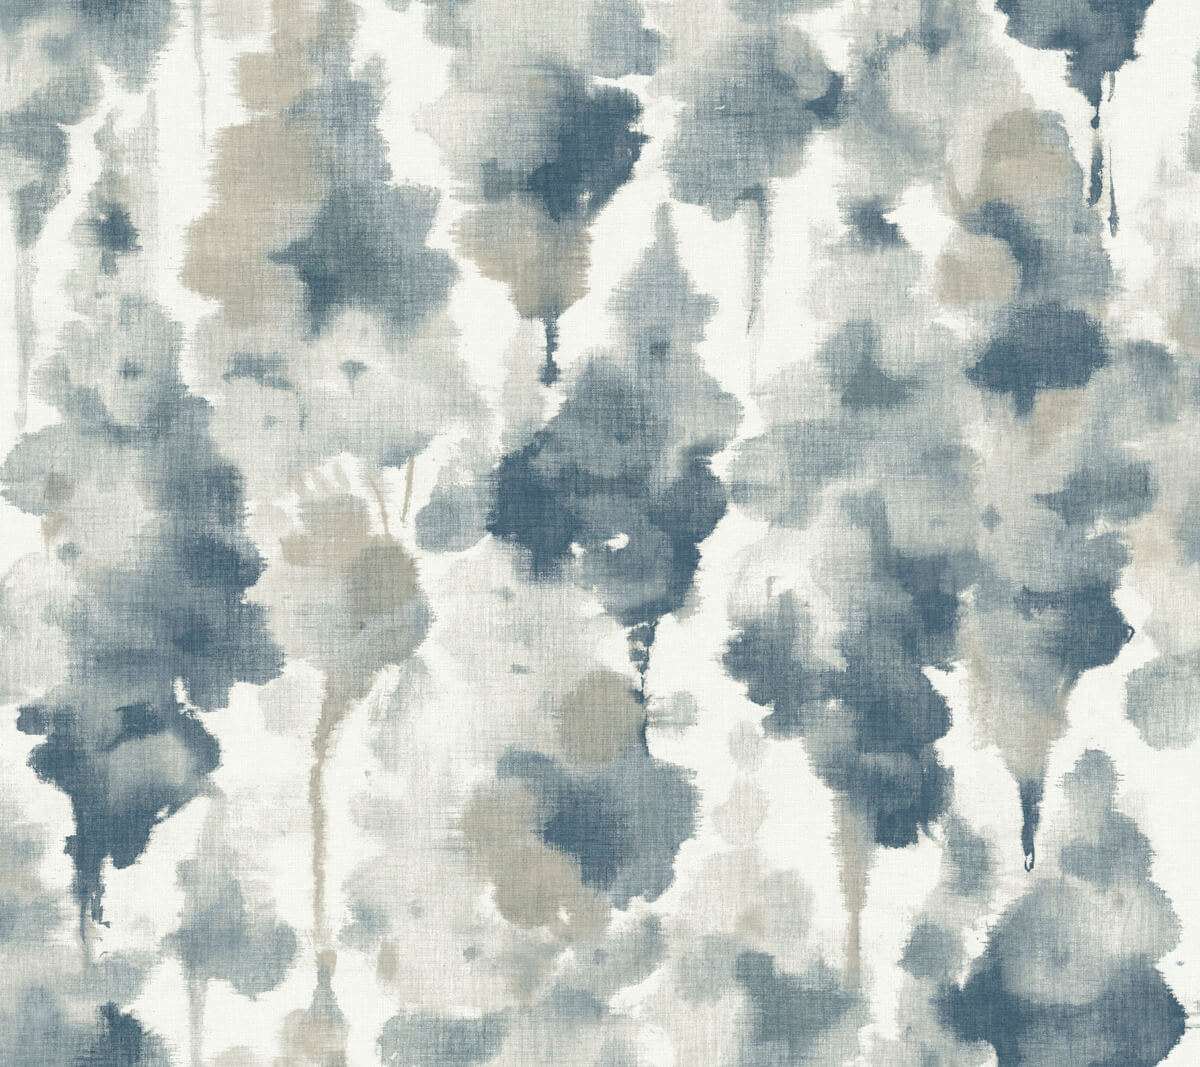 Candice Olson Modern Nature Second Edition Mirage Wallpaper - Navy